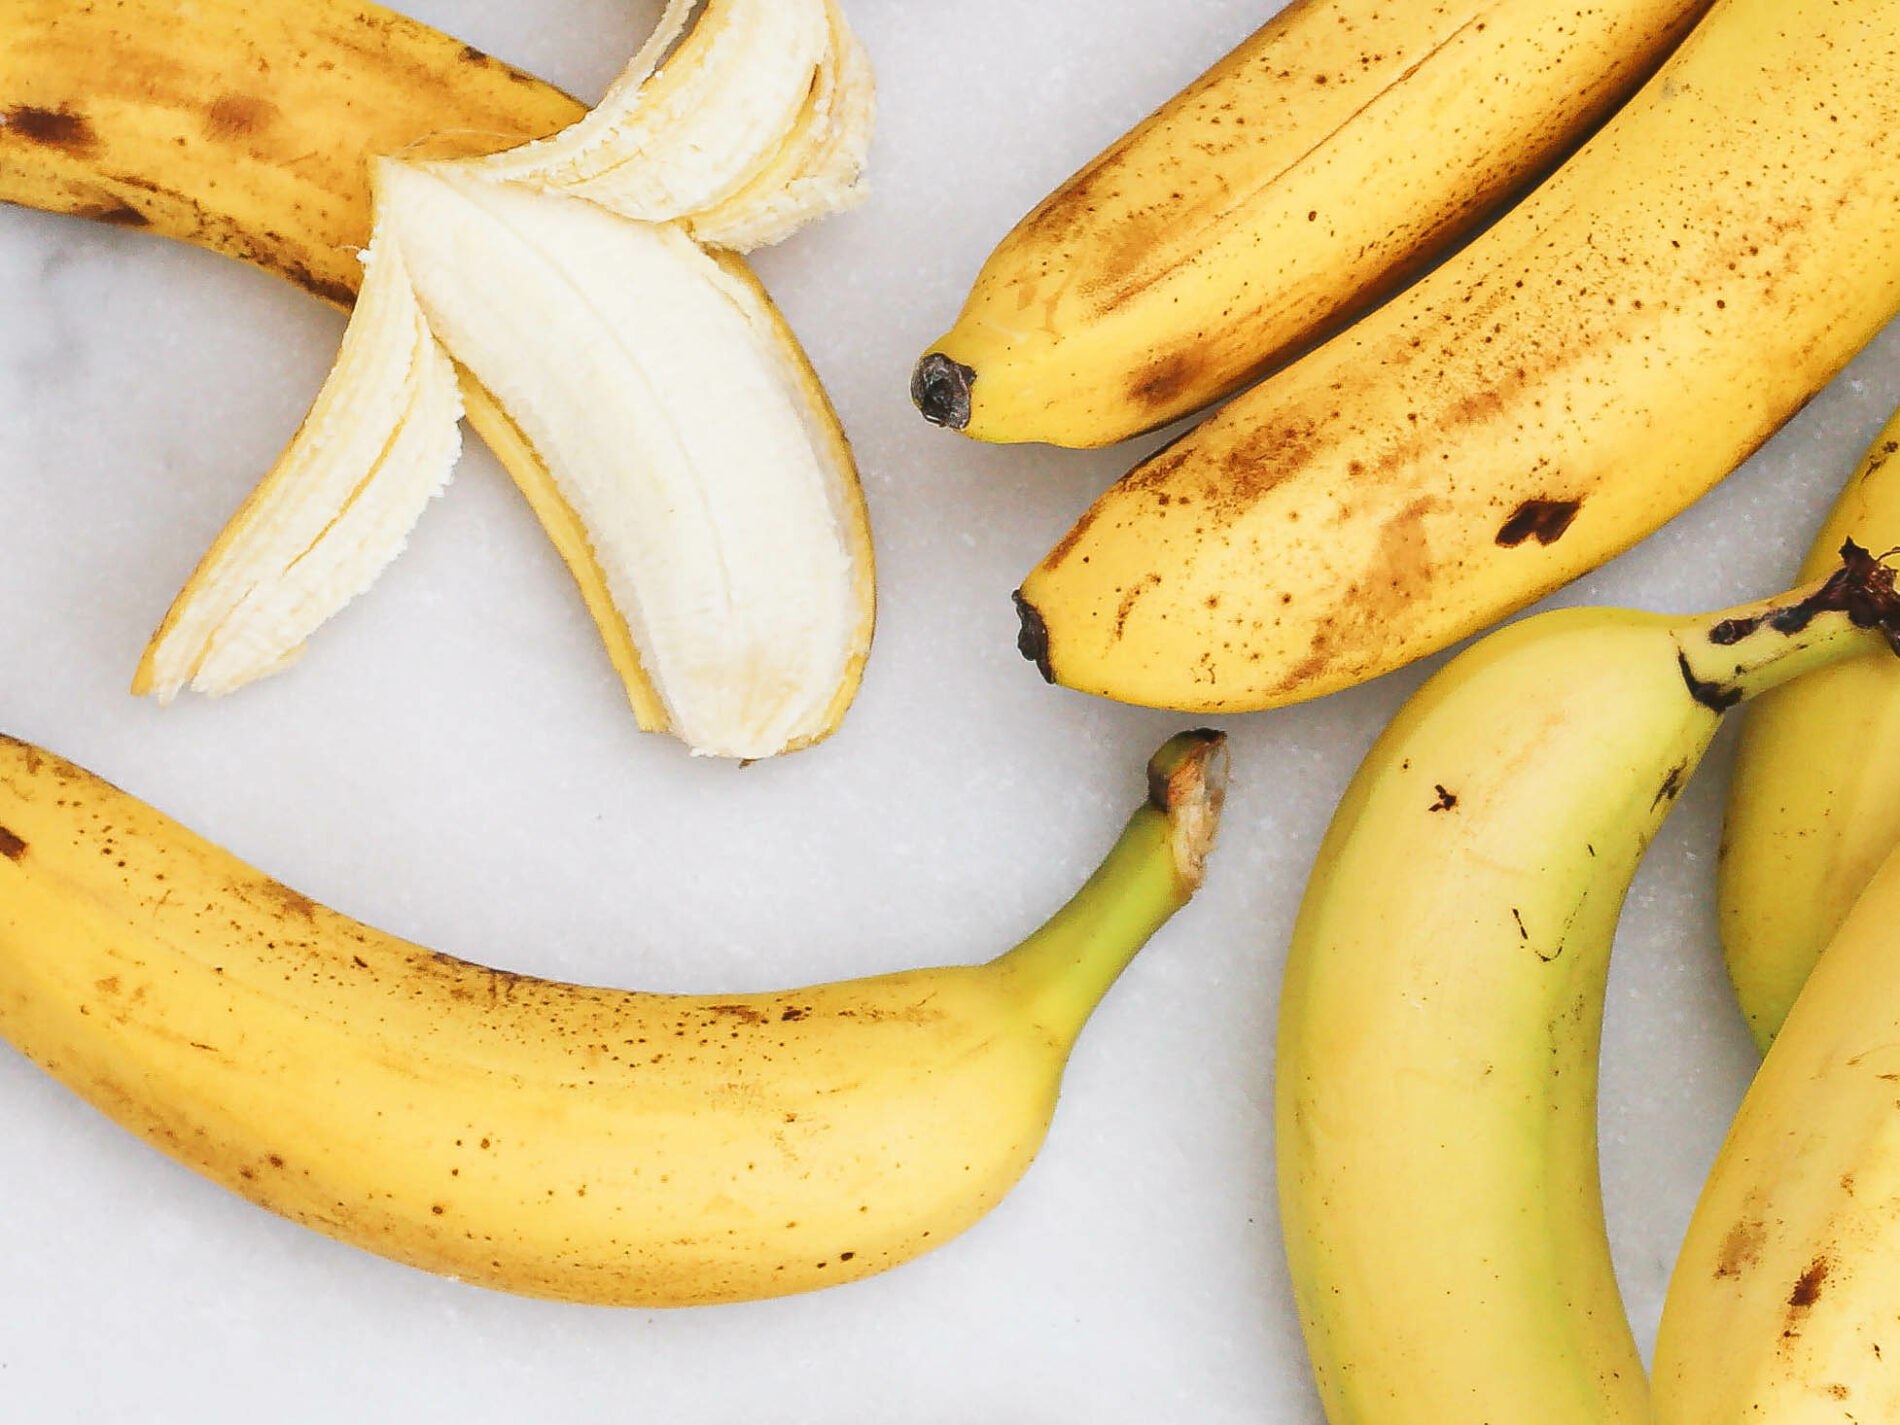 Several bananas on white background, one partly unpeeled